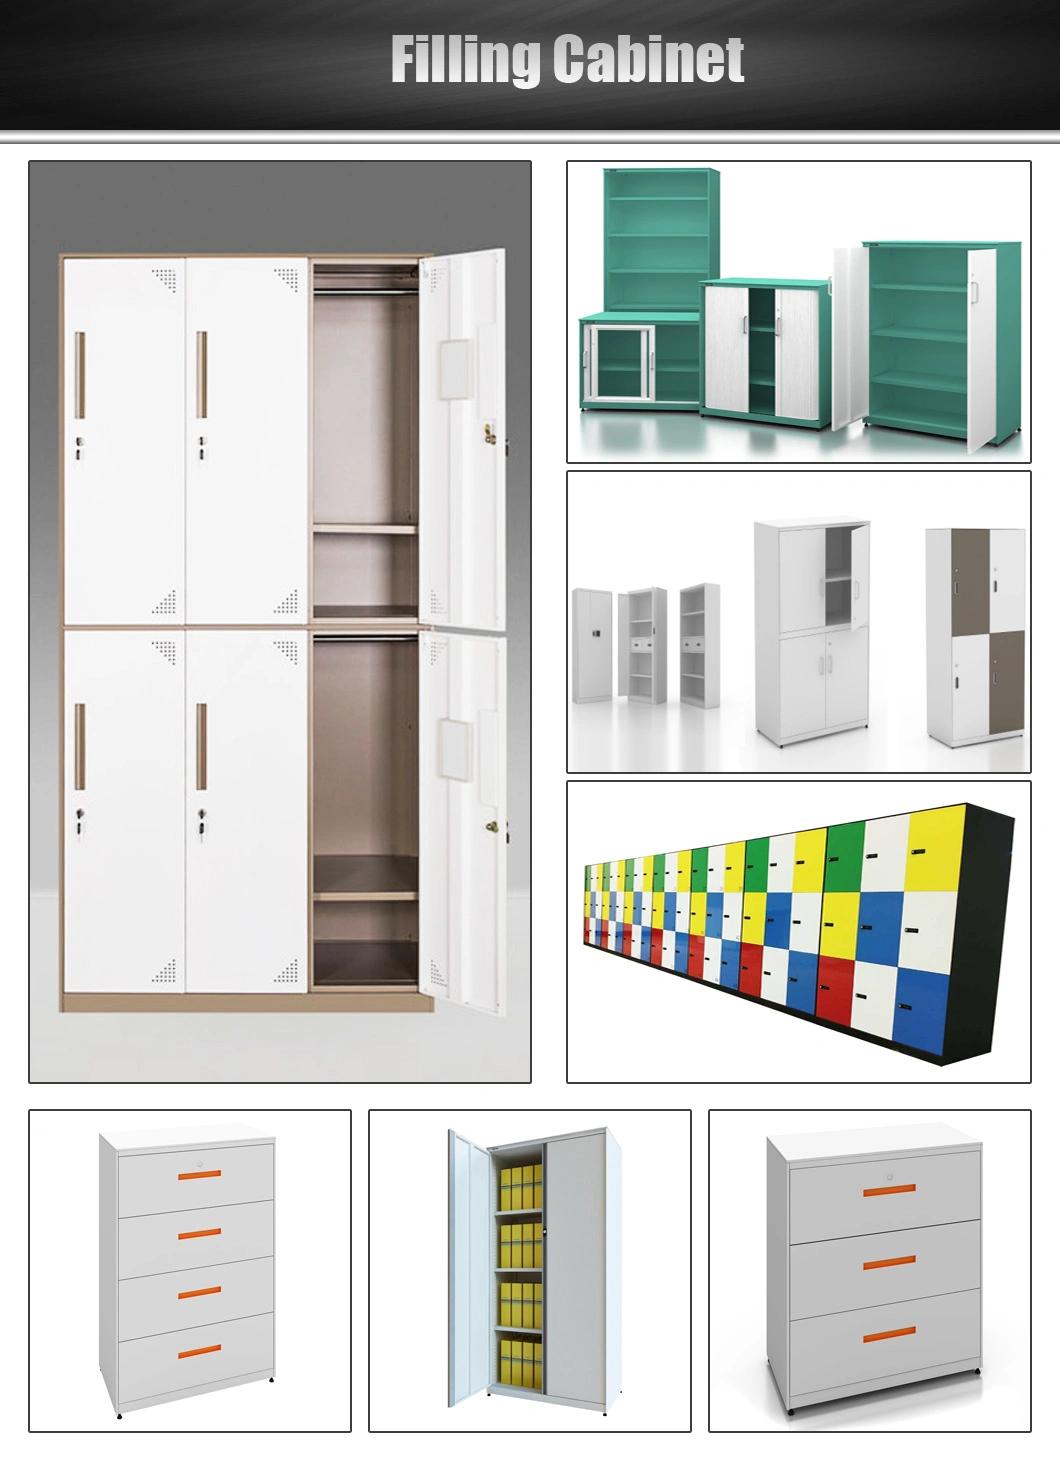 Exquisite Workmanship Work Storage Cabinets with Environmentally-Friendly Materials